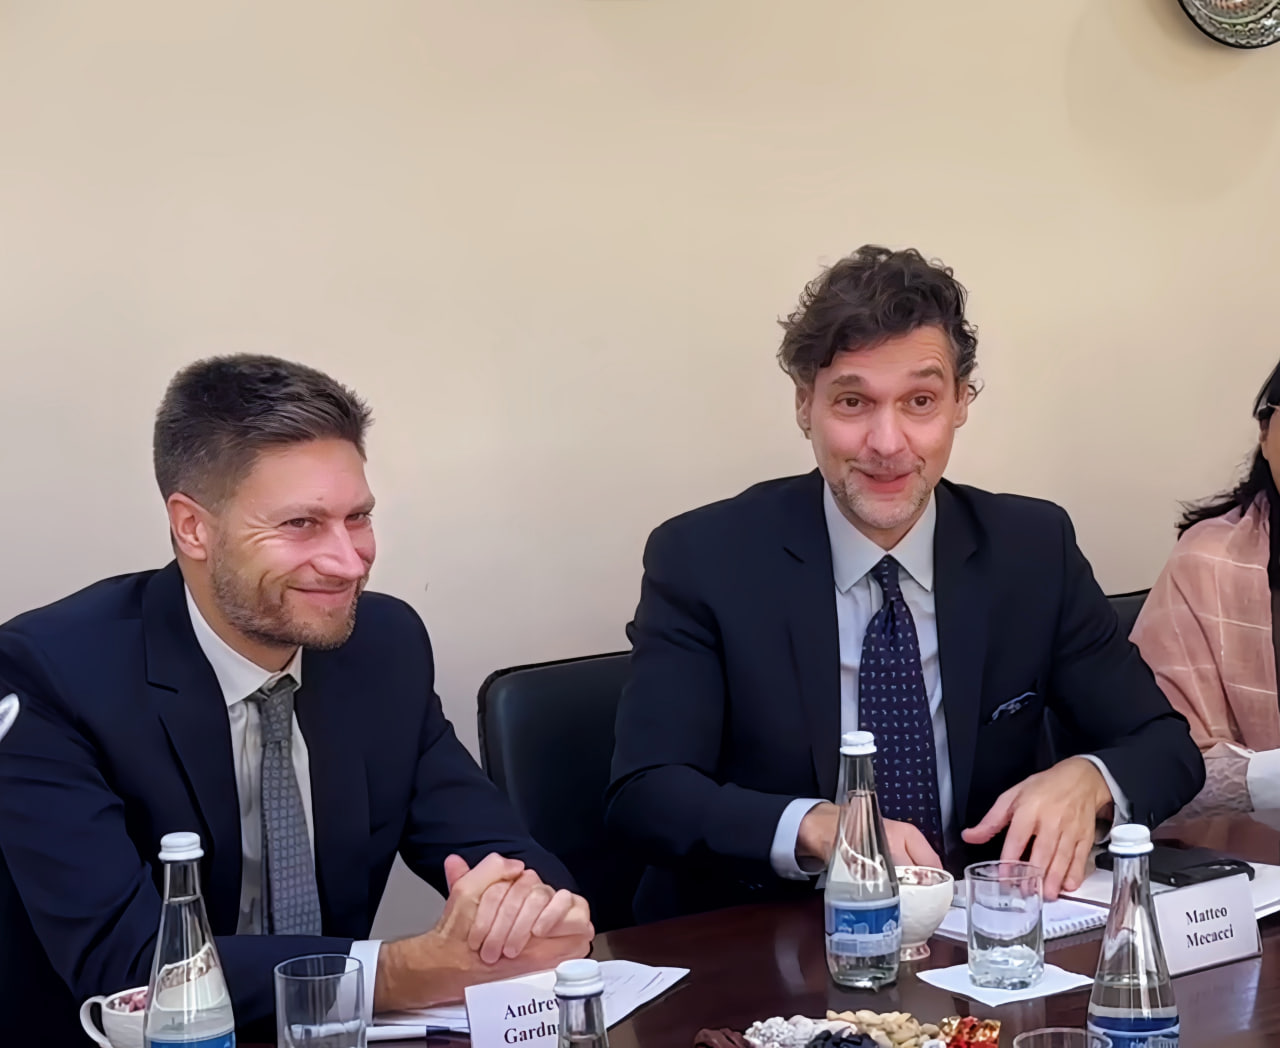 The Ombudsperson met with the Director of the OSCEODIHR Matteo Mecacci